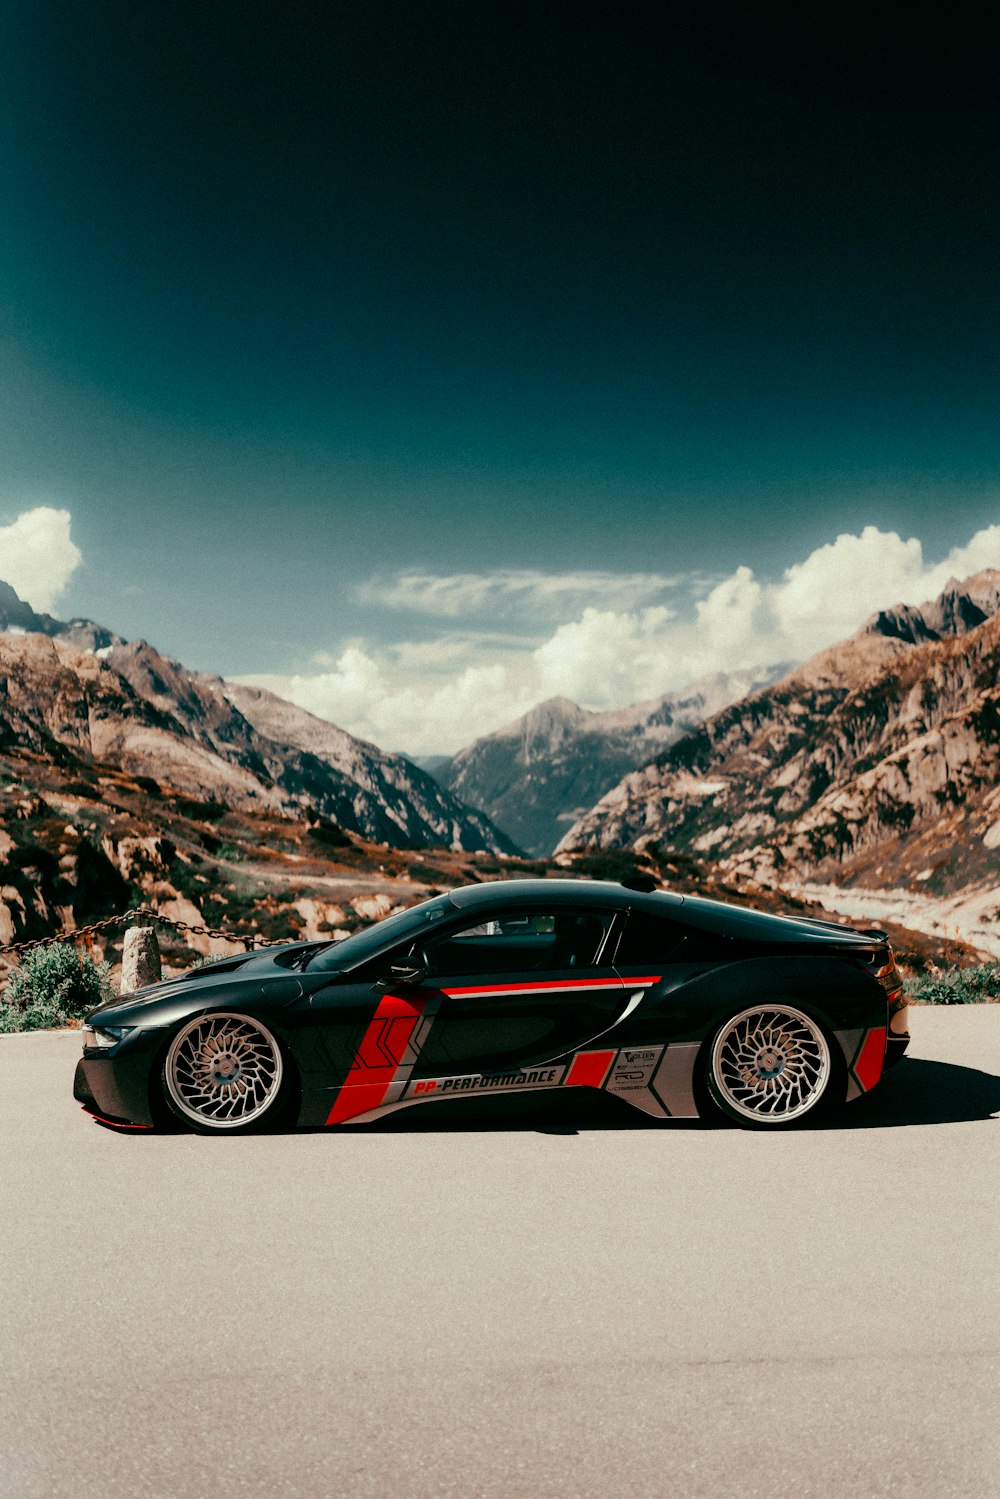 a black sports car parked in the middle of a desert